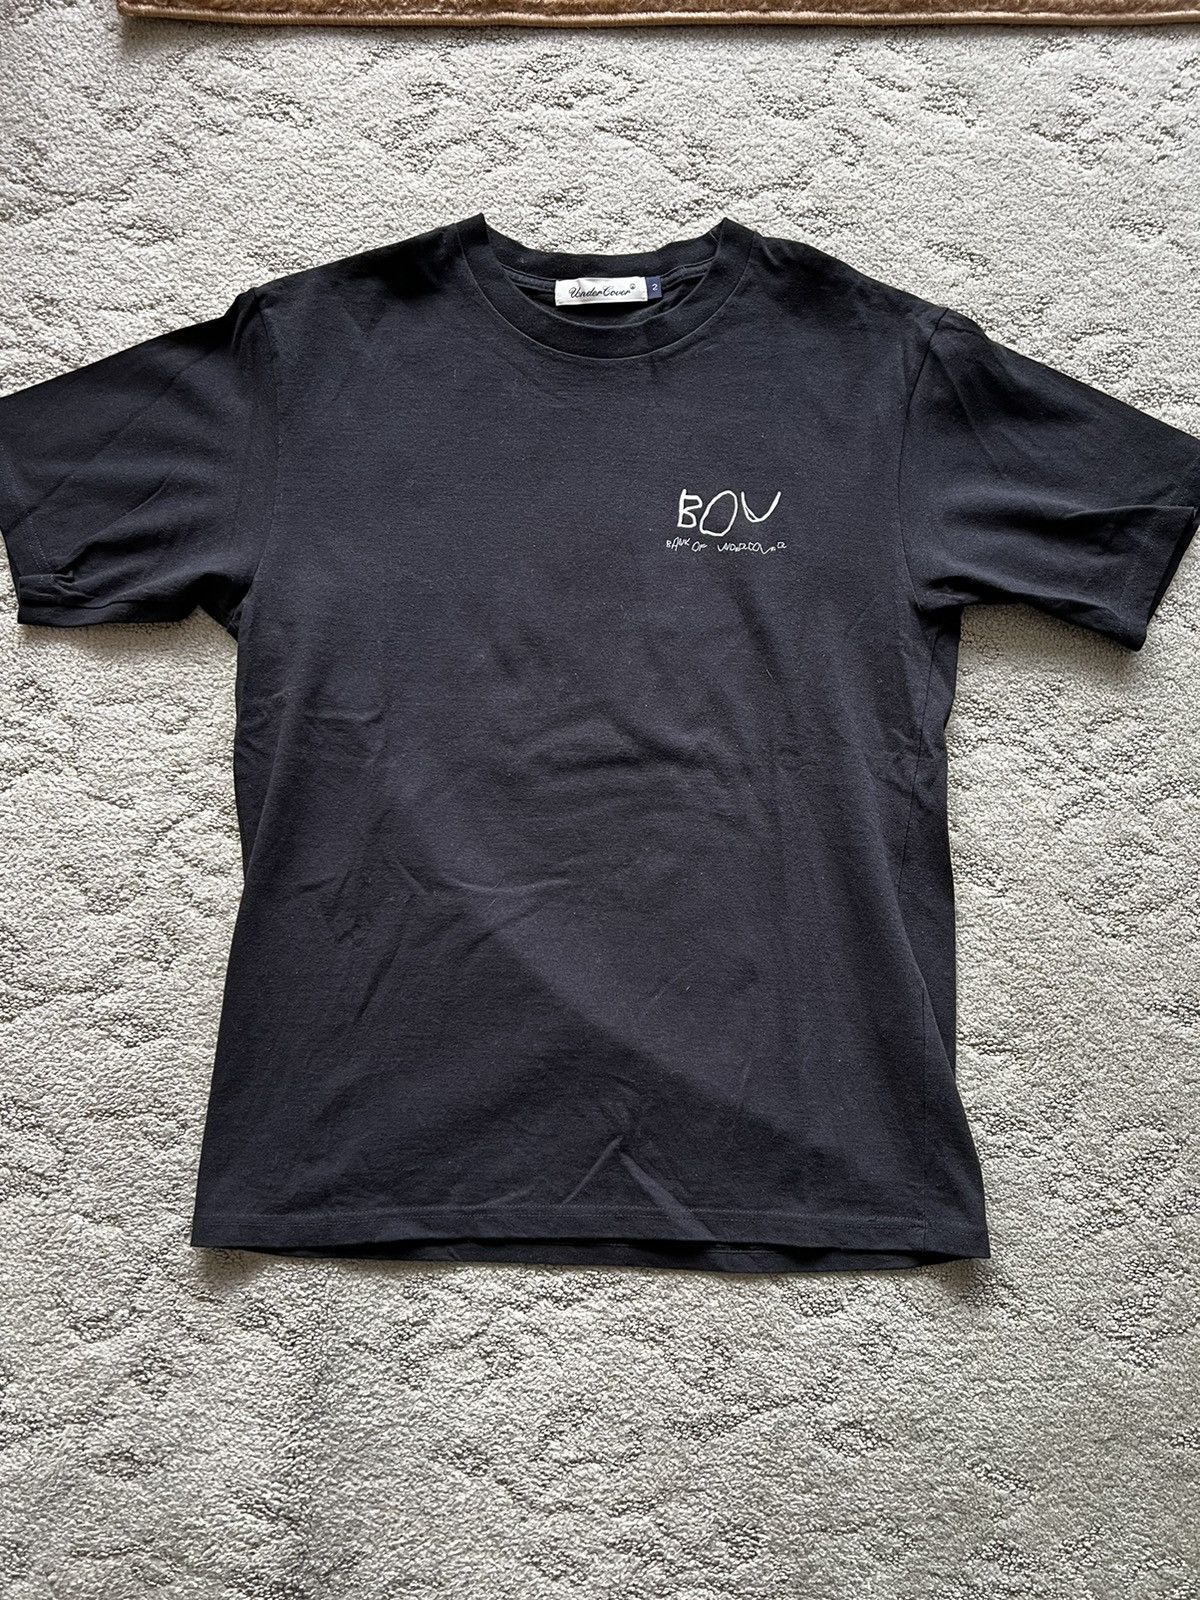 Undercover Bank of undercover BOU tee | Grailed